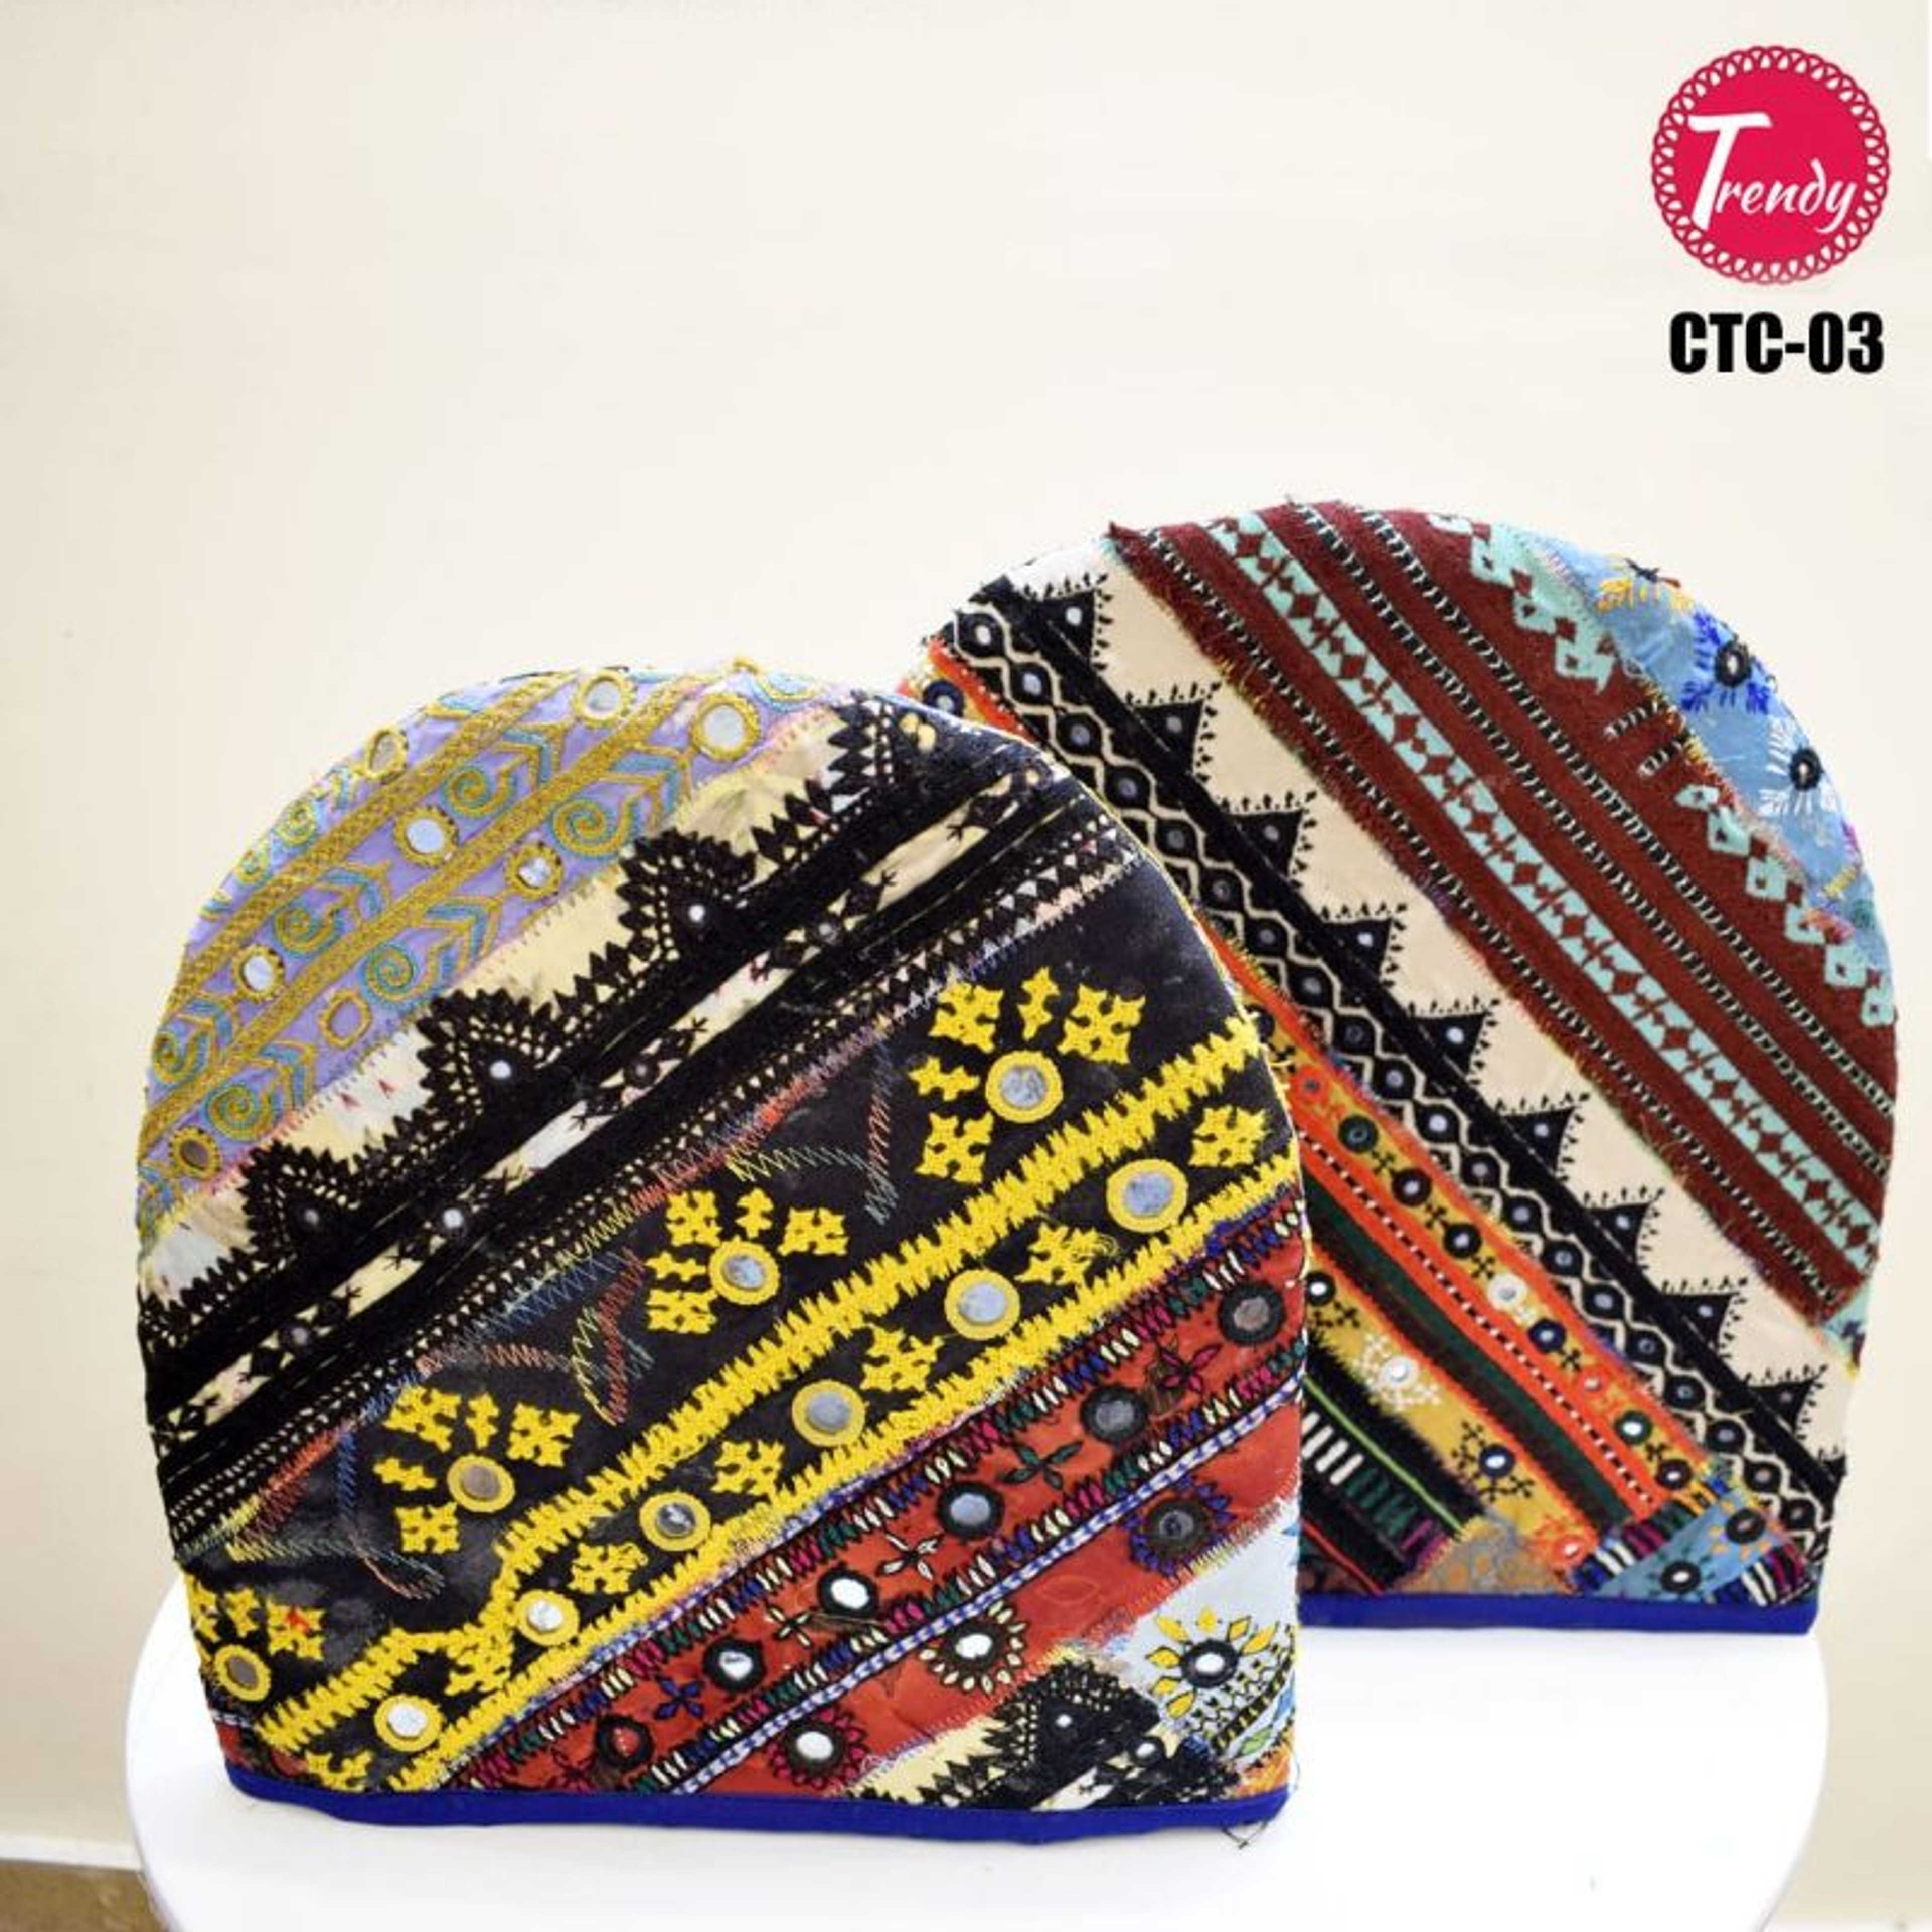 Sindhi Hand Crafted Embroidery Tea Cozy Pair CTC-03